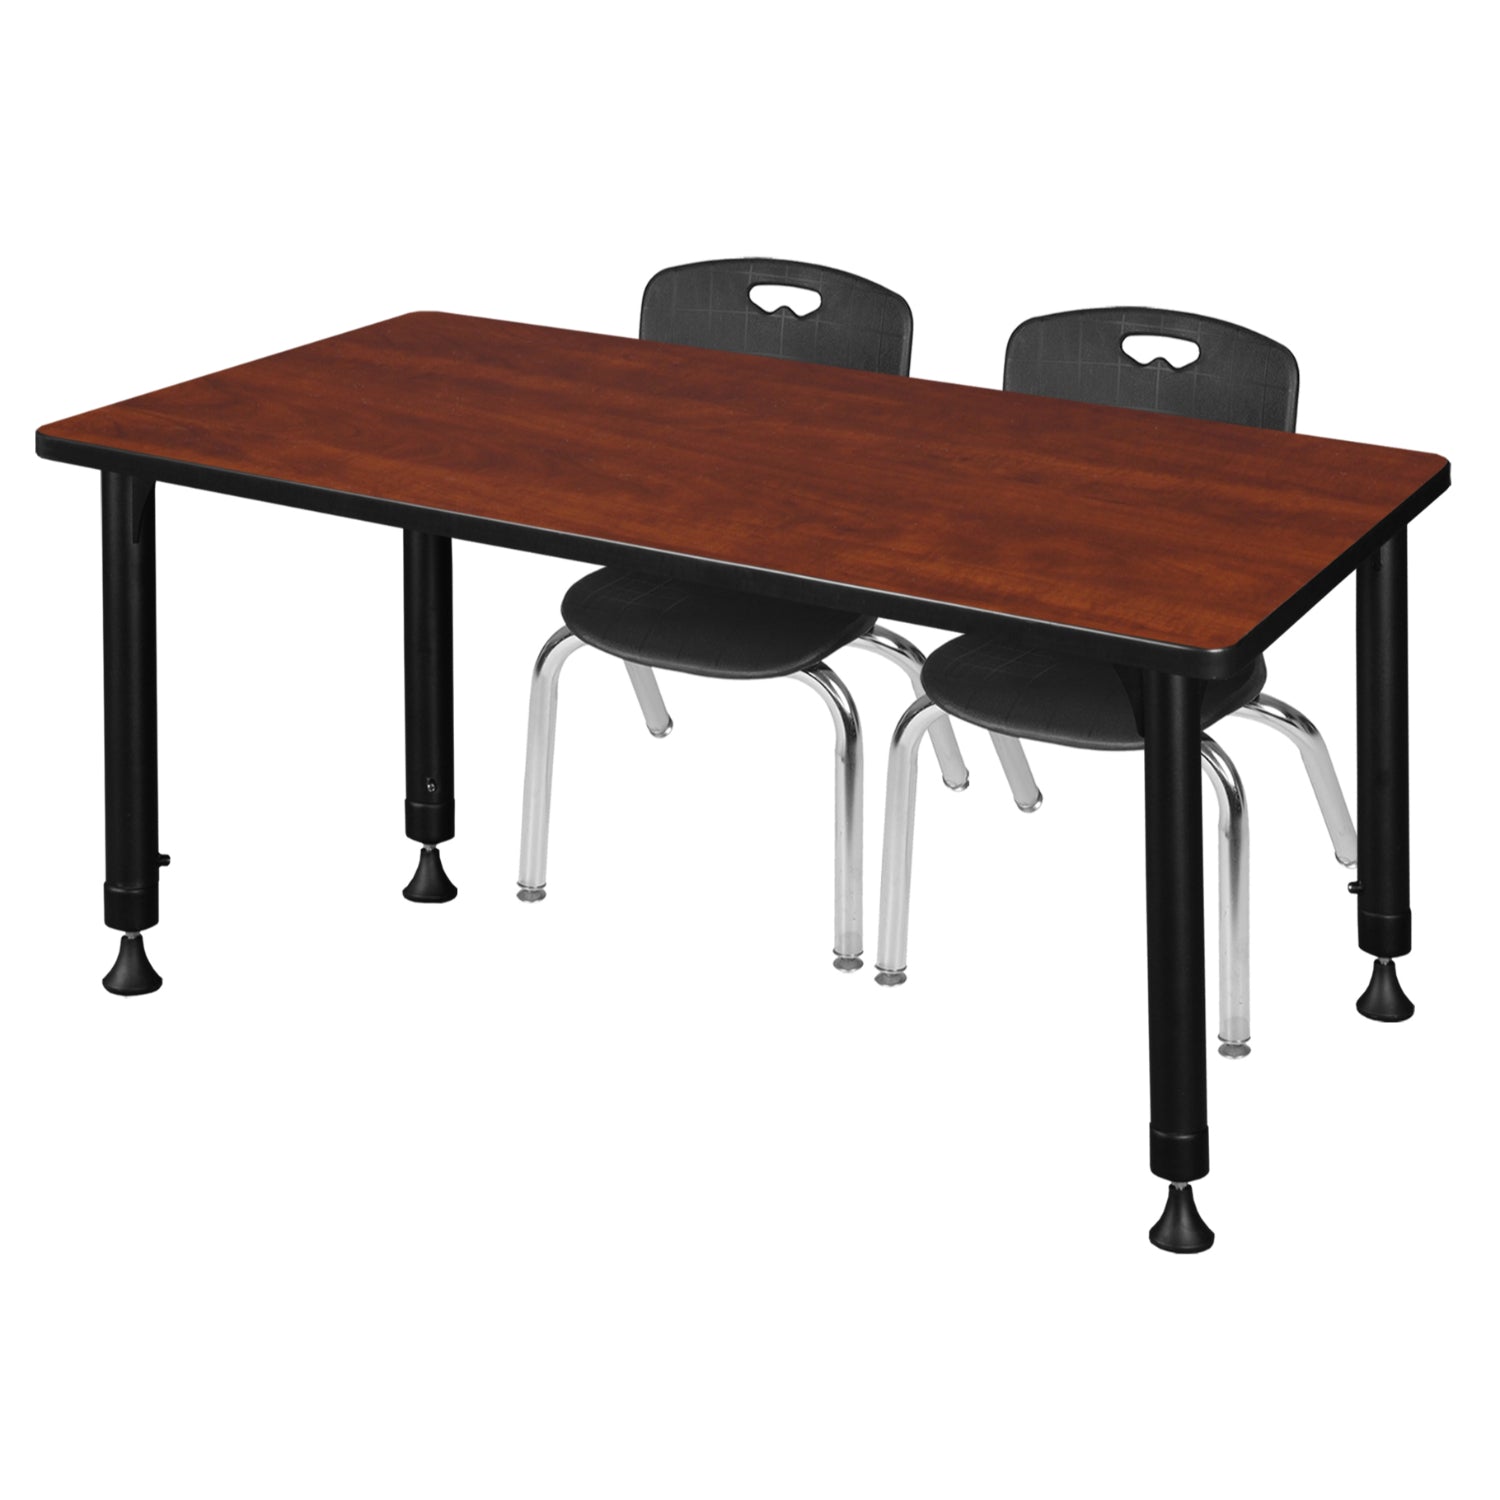 Kee Classroom Table and Chair Package, Kee 48" x 24" Rectangular Adjustable Height Table with 2 Andy 12" Stack Chairs